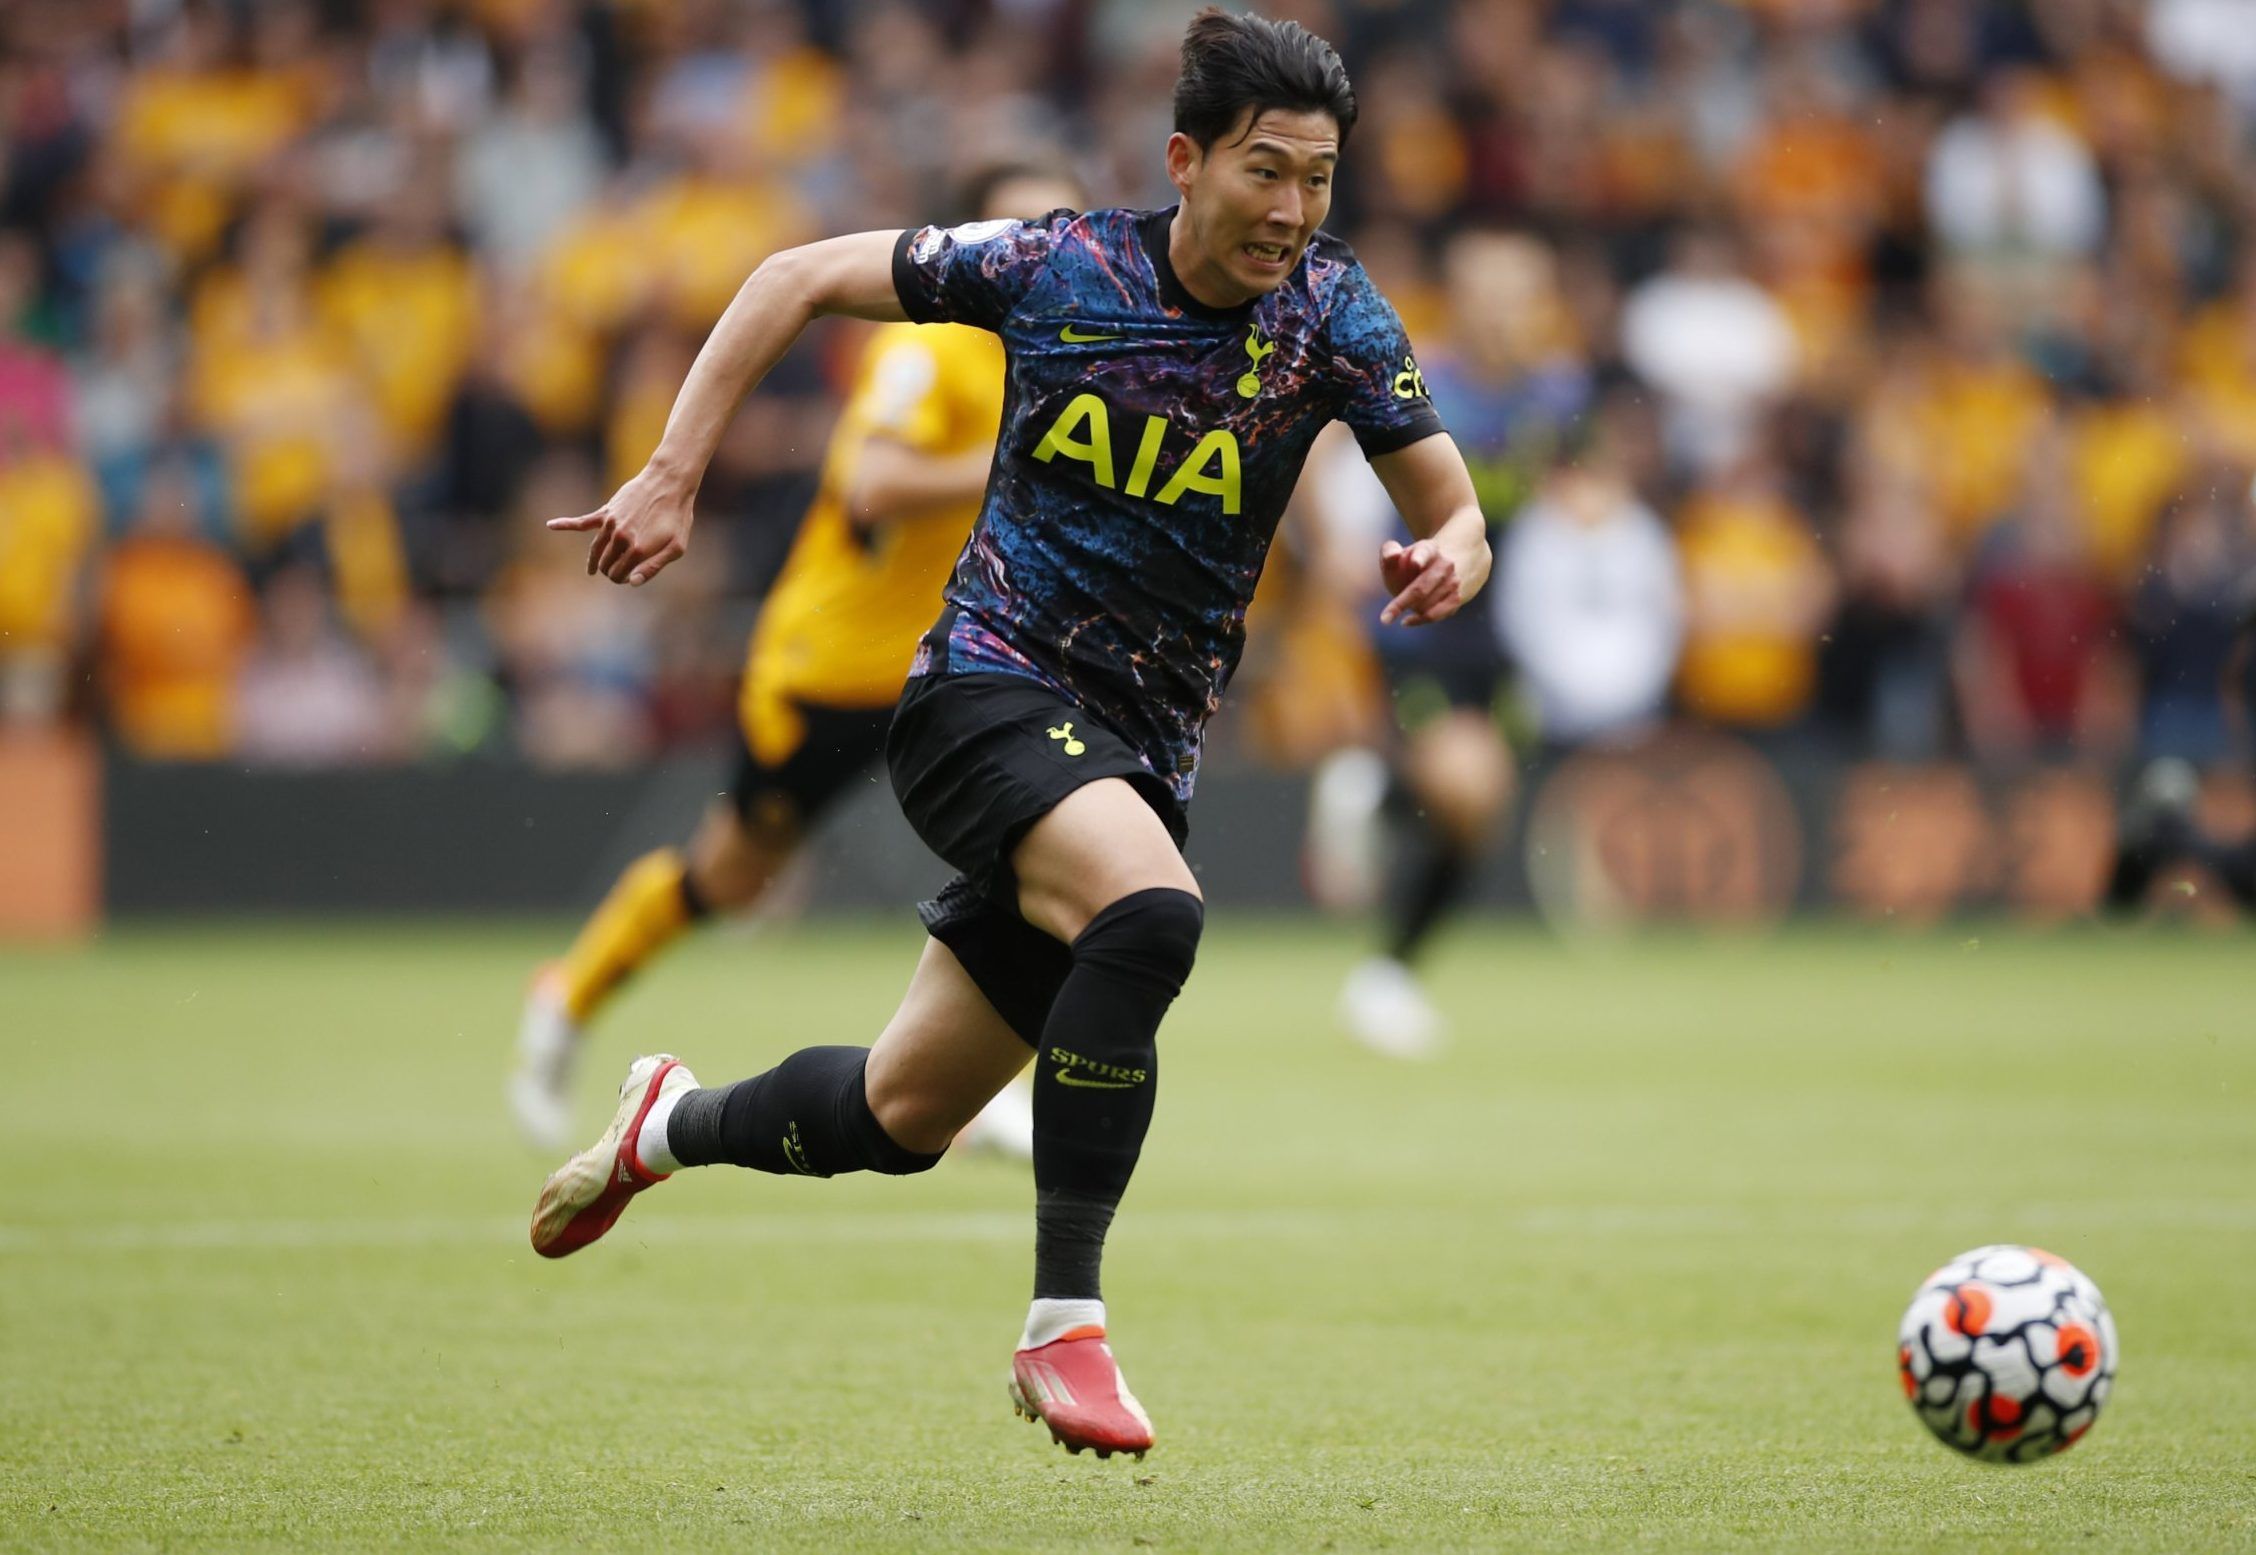 Tottenham Hotspur winger Heung-min Son on the ball against Wolves in the Premier League